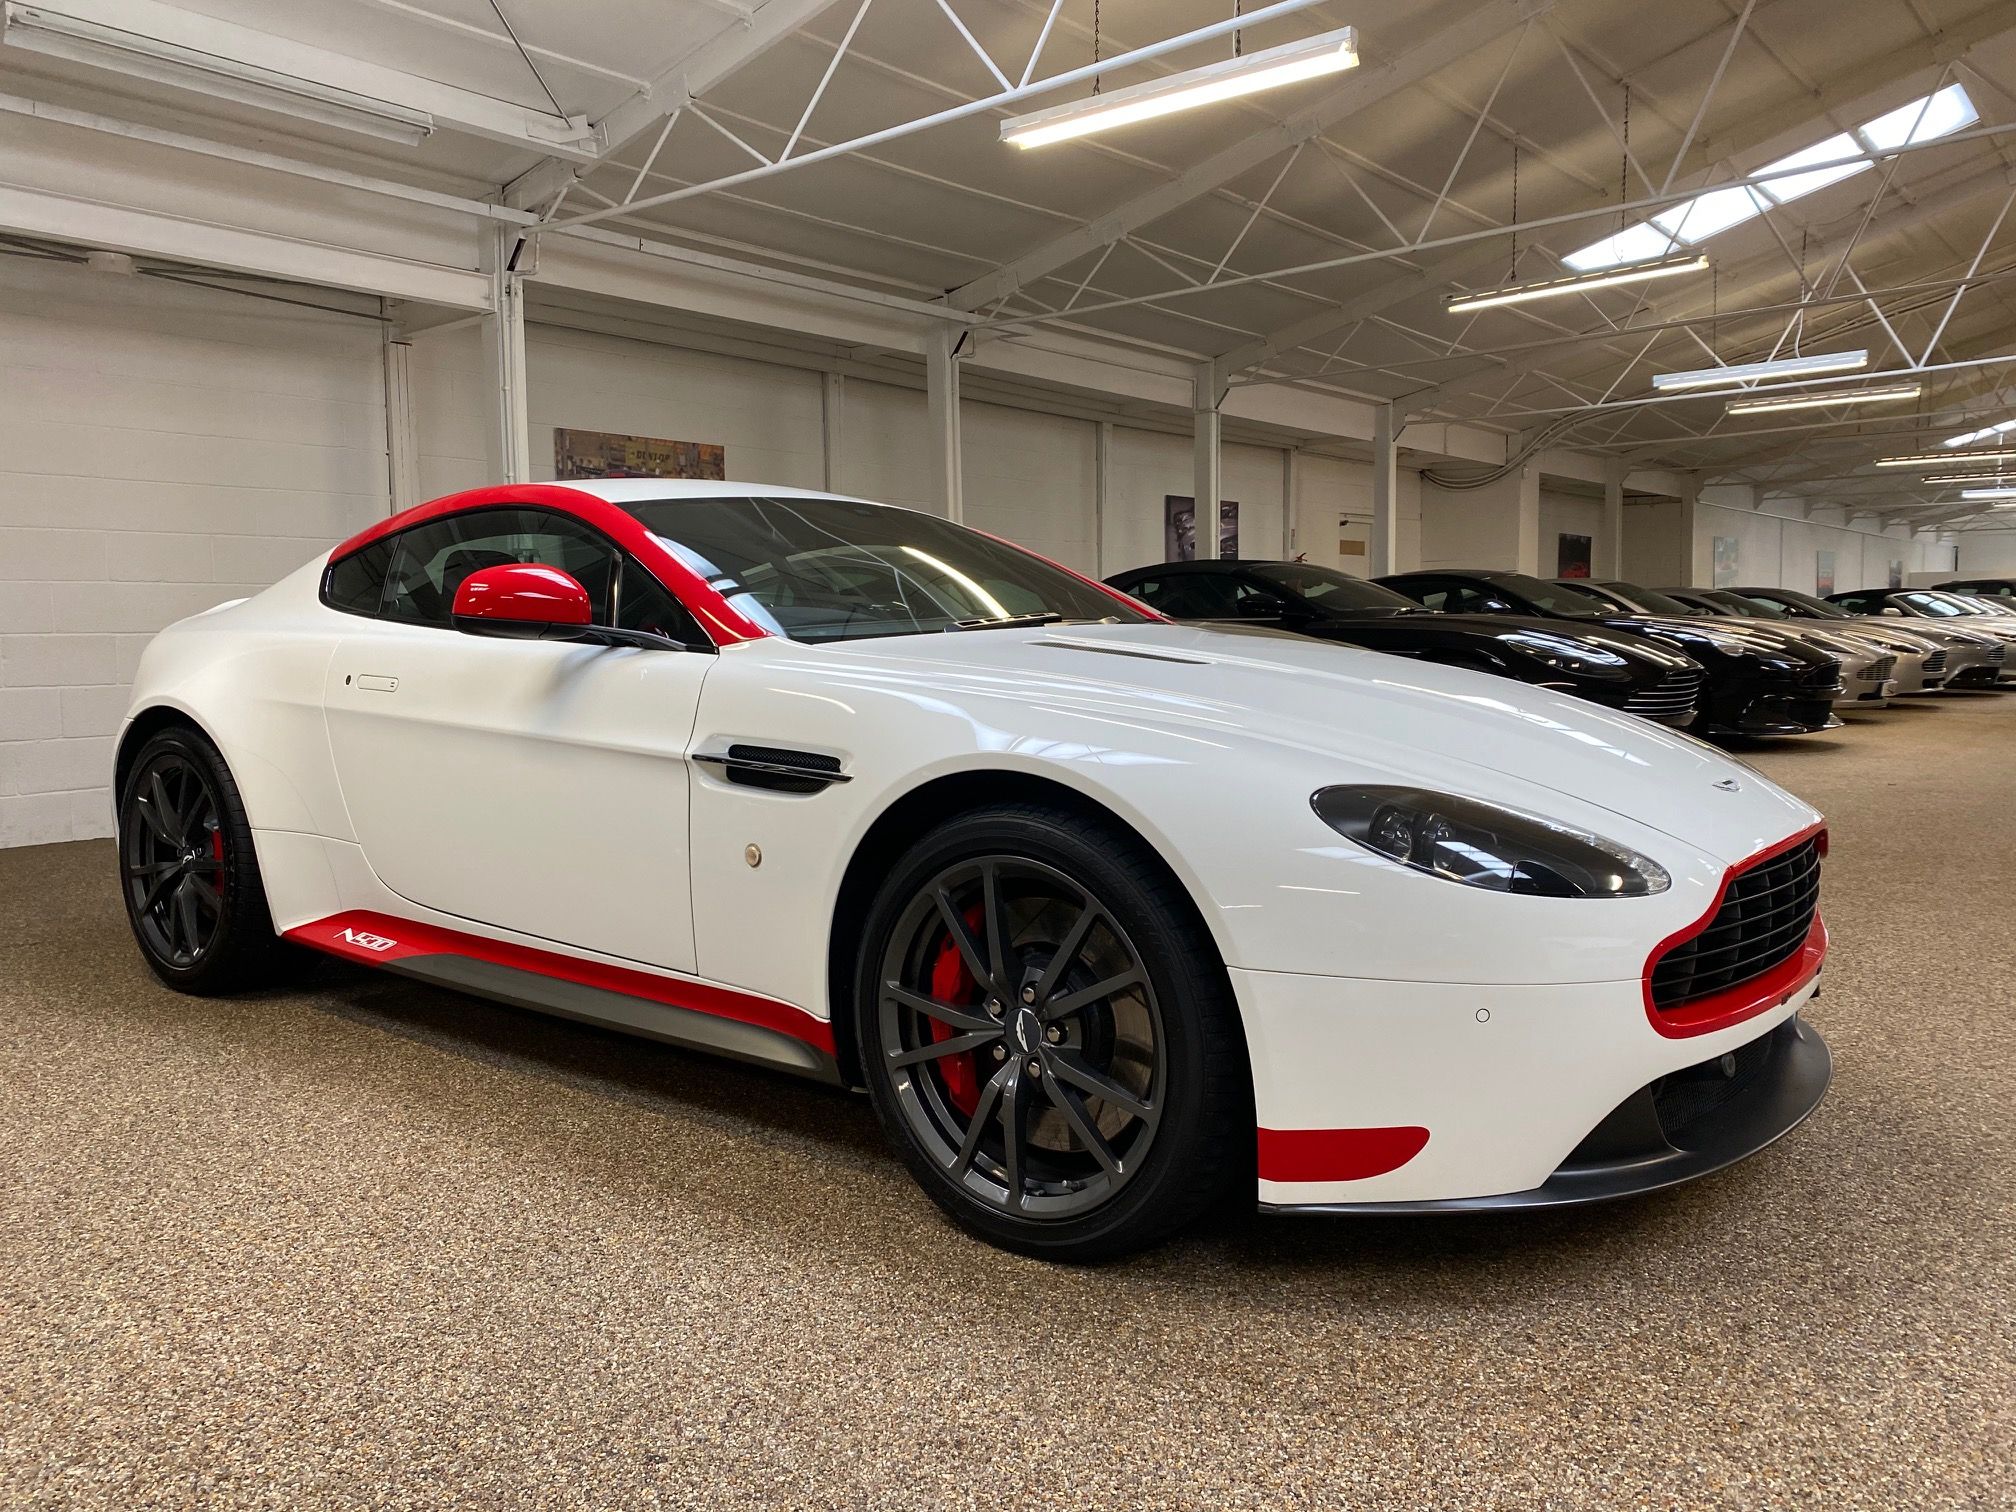 Used Aston Martin N430 Manual for sale